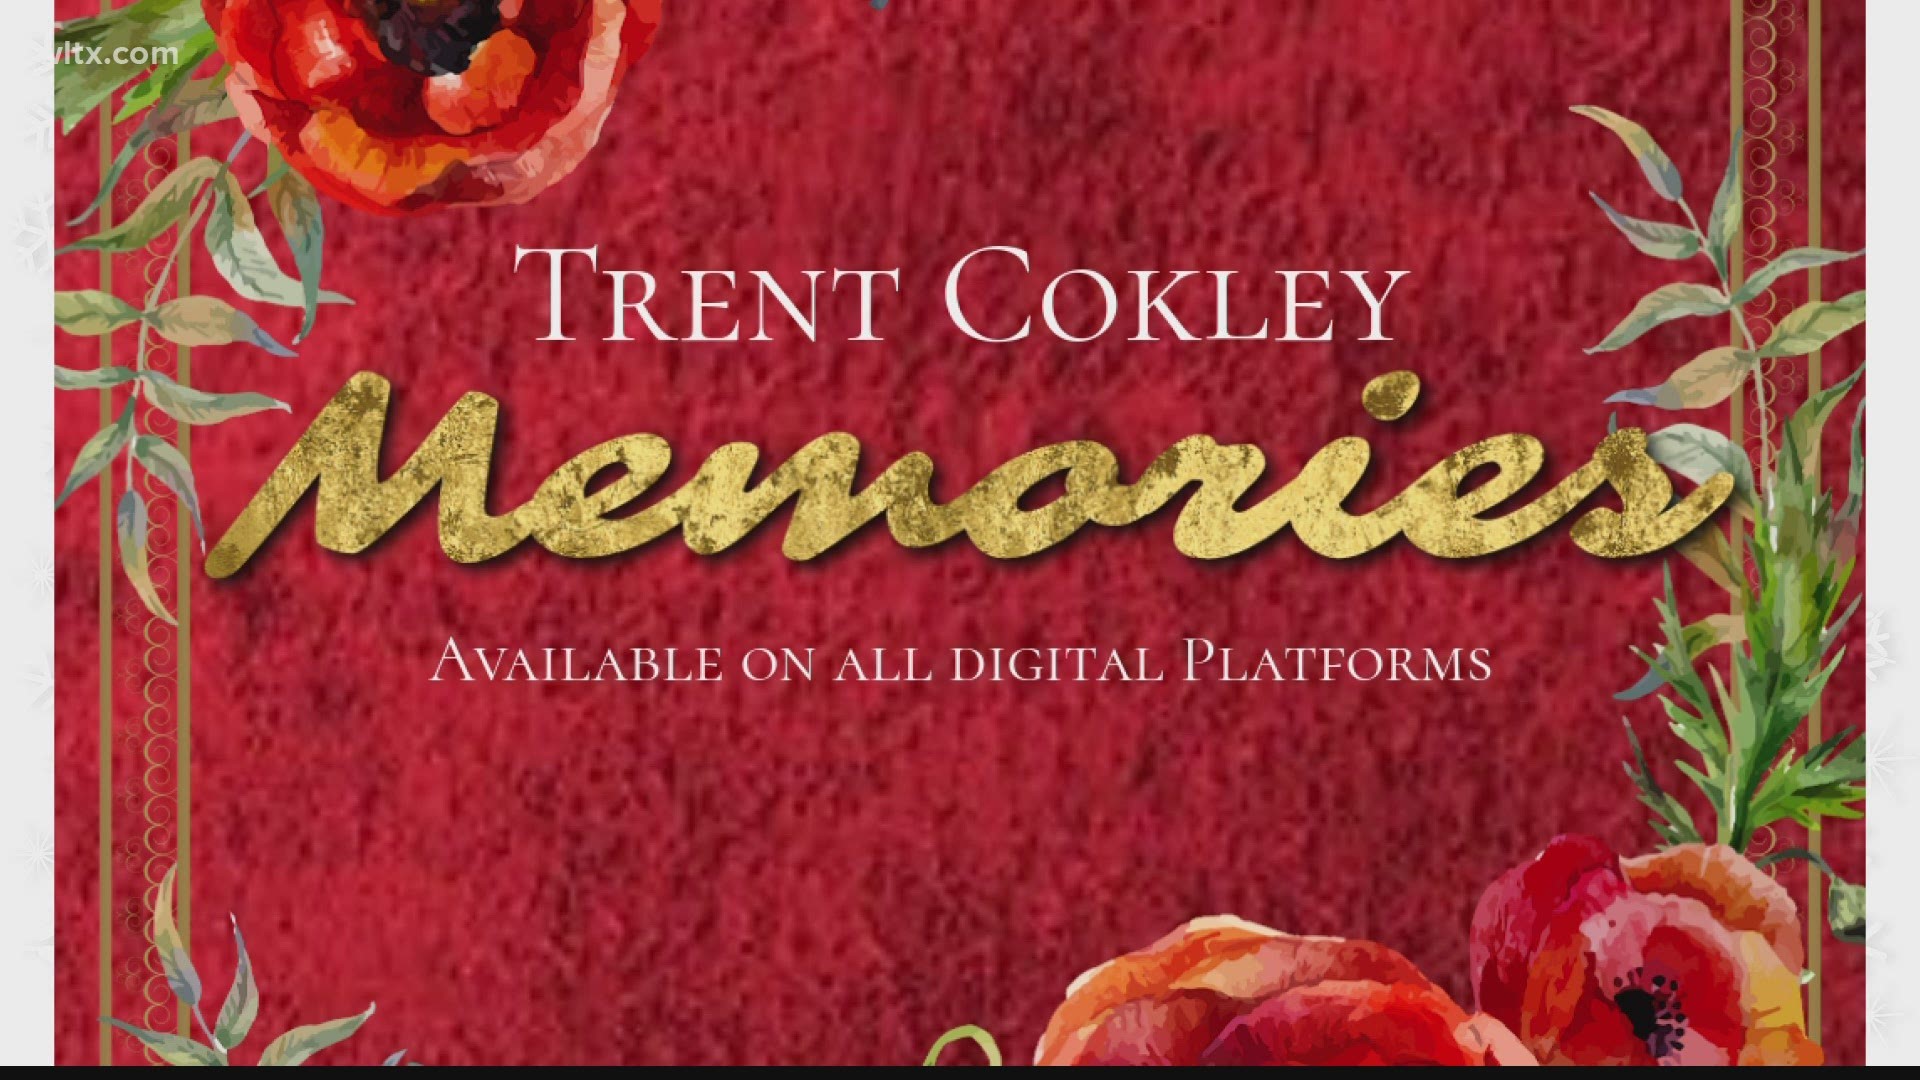 Trent Cokley's song "Memories" has been featured in the Lifetime TV movie 'Merry Liddle Christmas Wedding' starring Kelly Rowland.